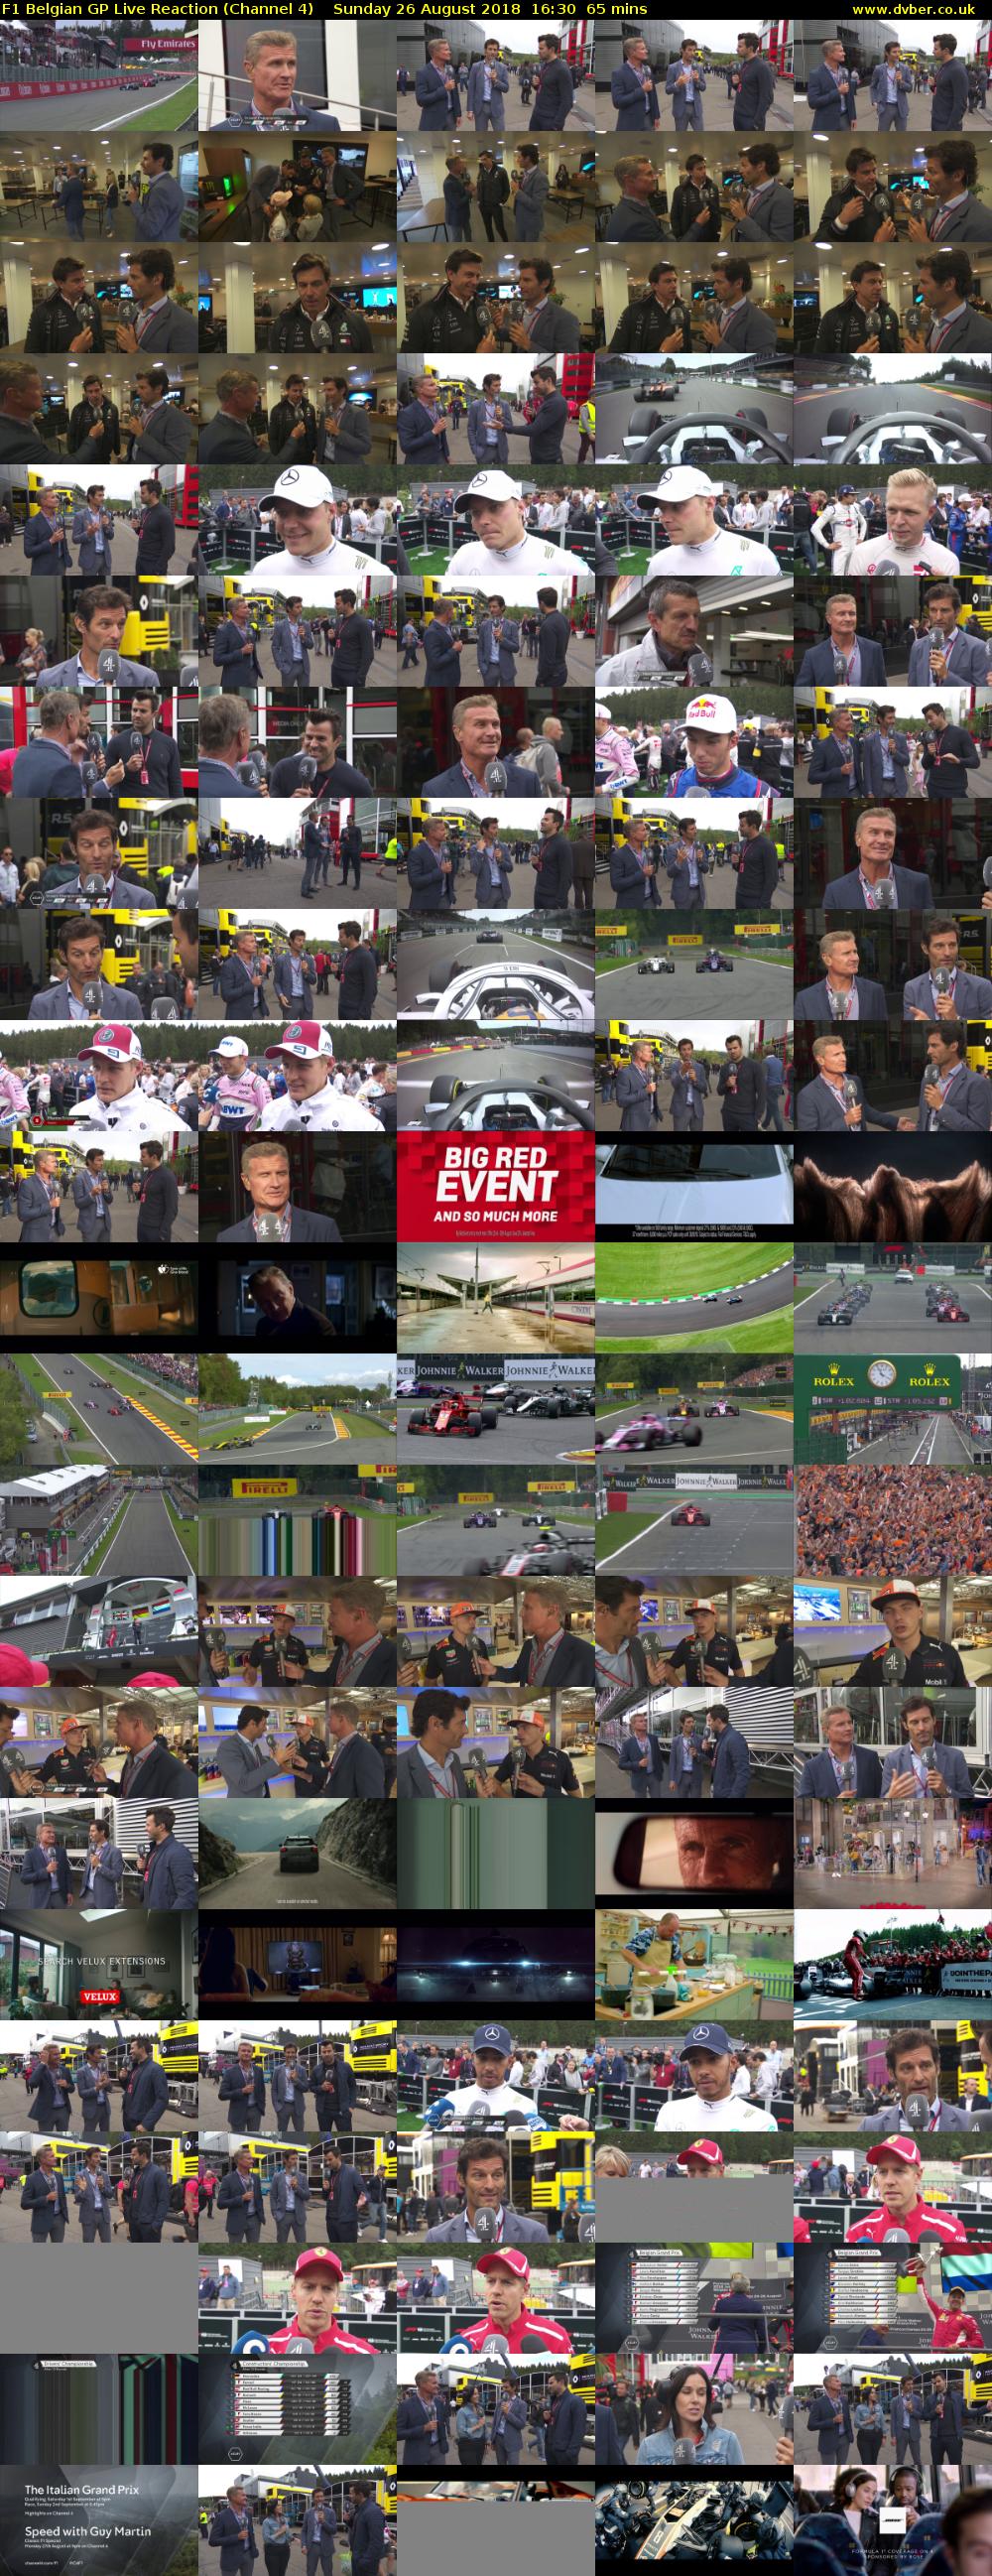 F1 Belgian GP Live Reaction (Channel 4) Sunday 26 August 2018 16:30 - 17:35